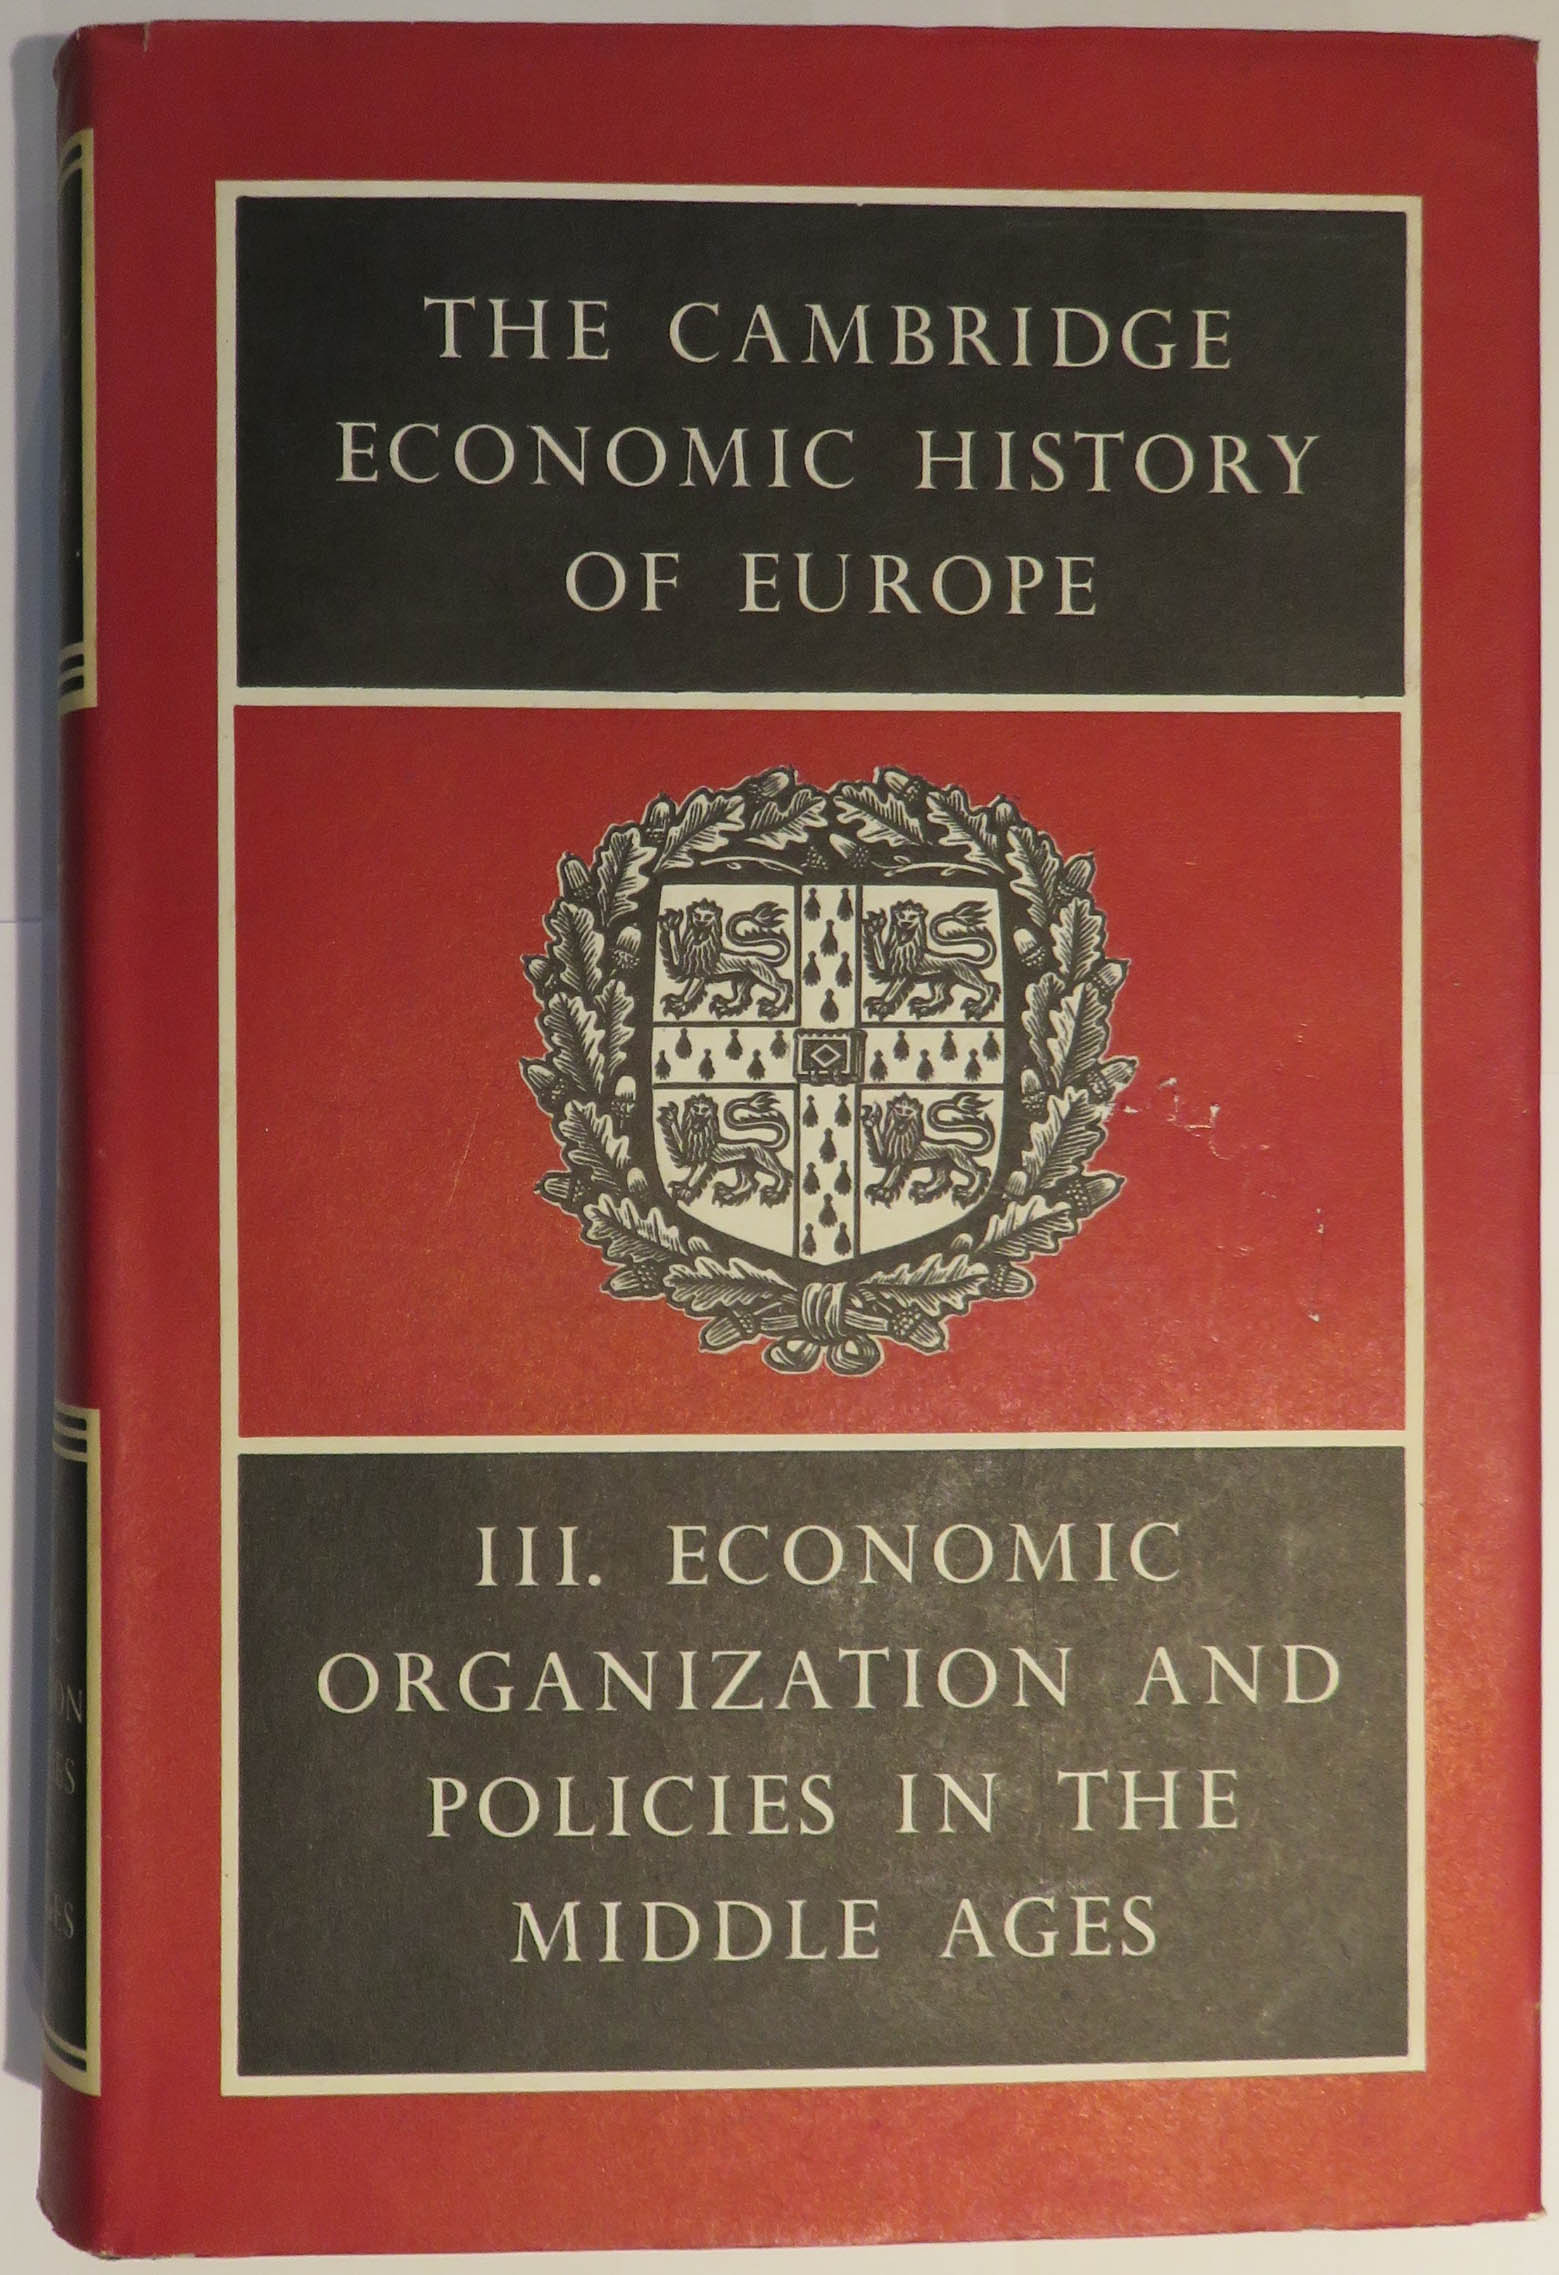 The Cambridge Economic History of Europe: Volume III. Economic Organization and Policies in the Middle Ages